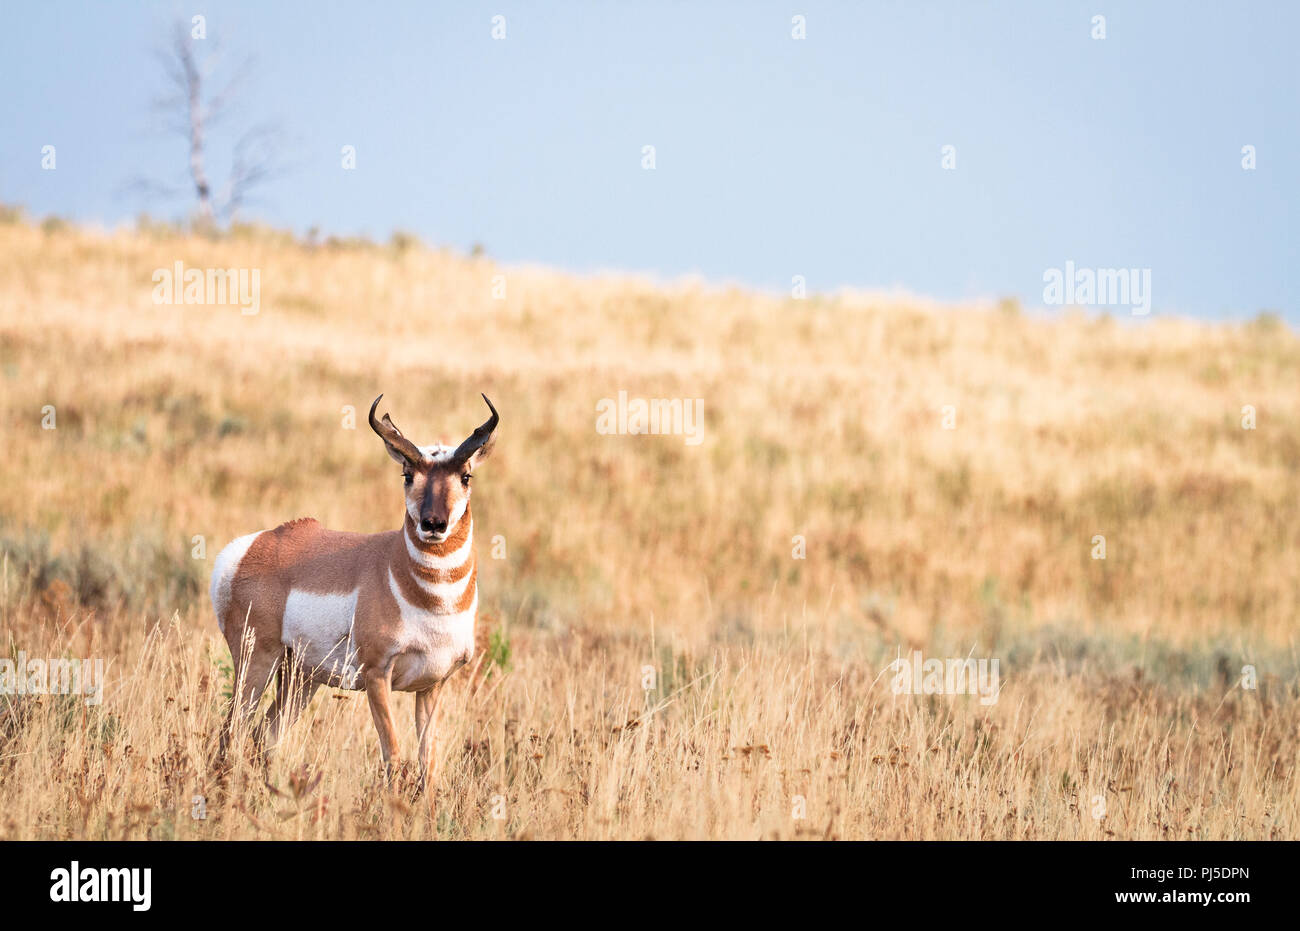 A pronghorn (Antilocapra americana) walks through a dry grass field in Yellowstone National Park, Wyoming. Stock Photo